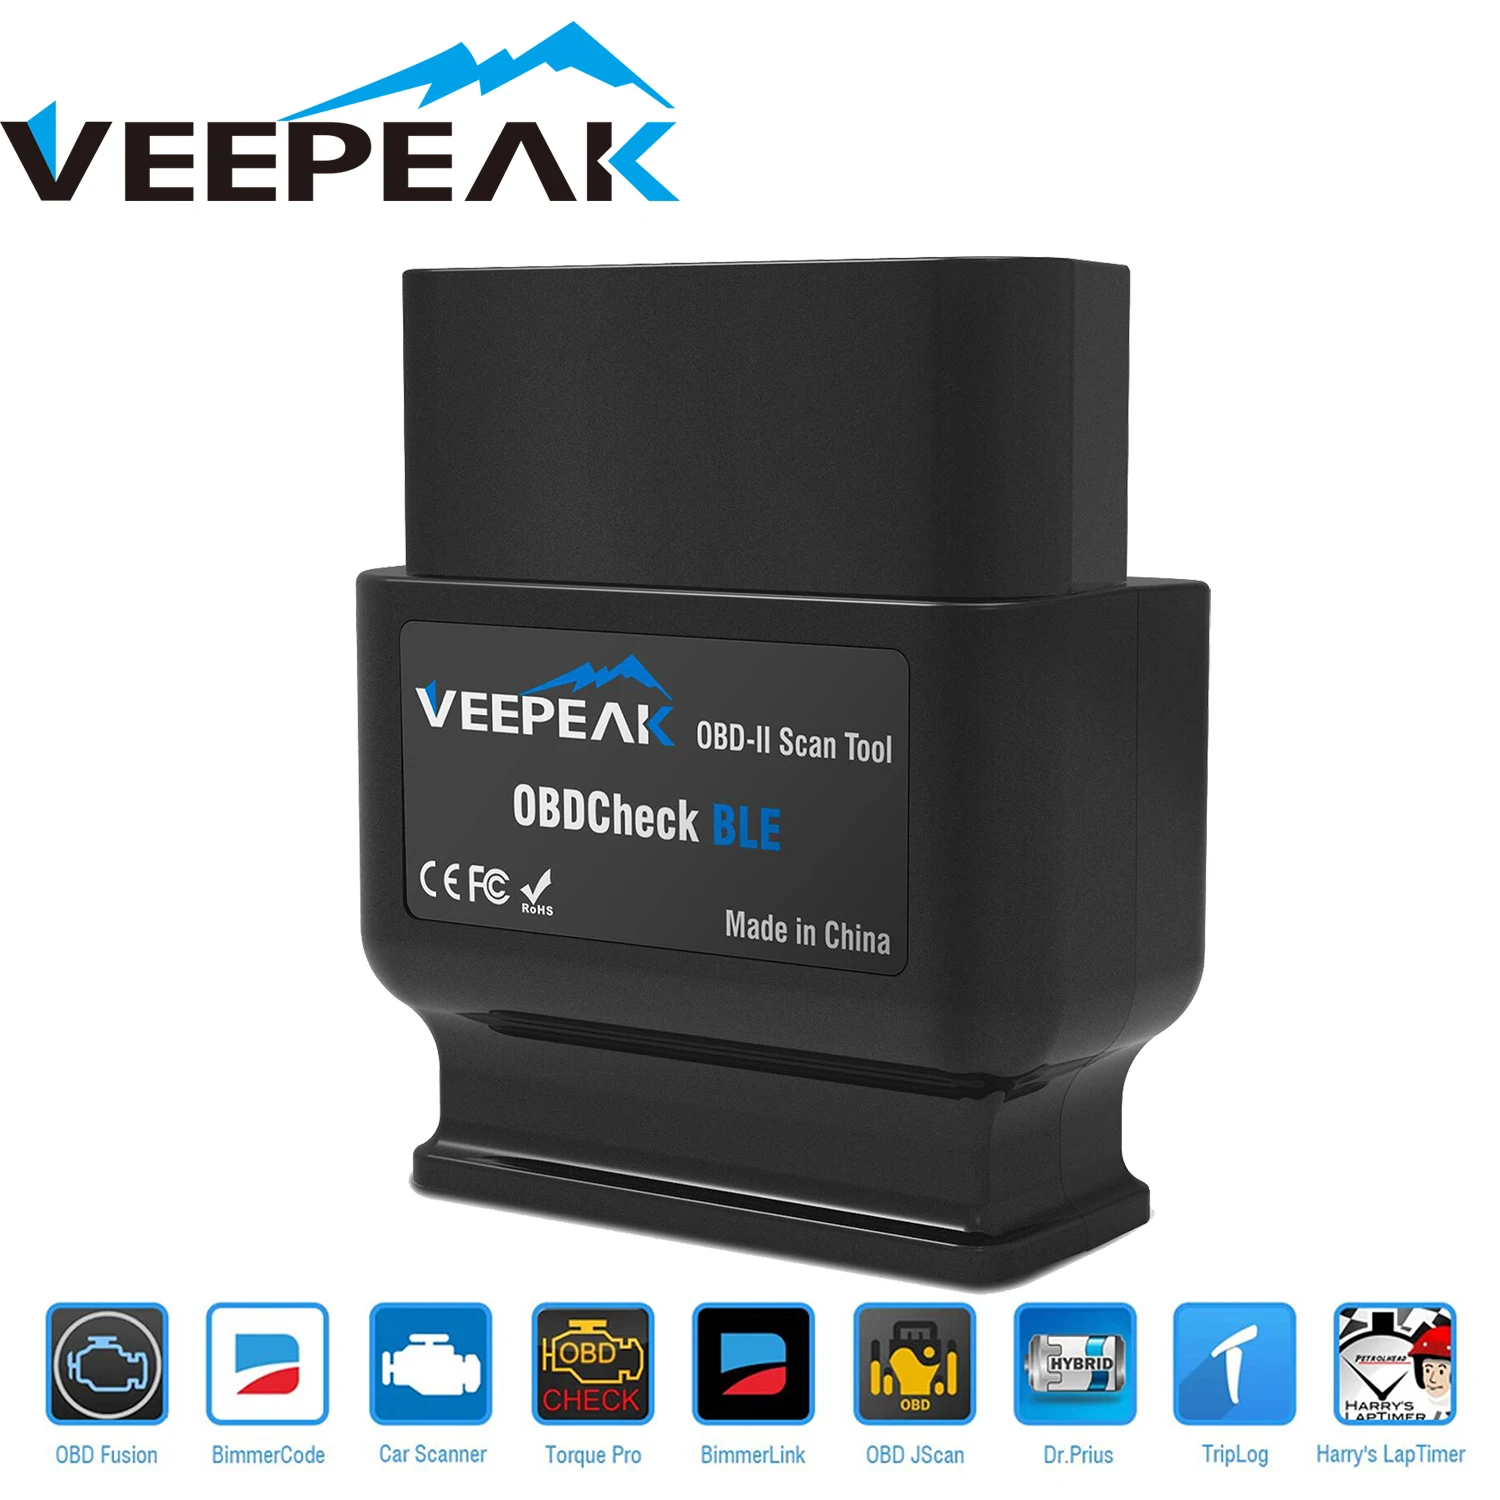 Veepeak OBDCheck BLE OBD2 Bluetooth Scanner Auto OBD II Diagnostic Scan Tool for iOS & Android, BT4.0 Car Check Engine veepeak mini bluetooth obd2 scanner for android car obd ii diagnostic scan tool check engine light code reader supports torque